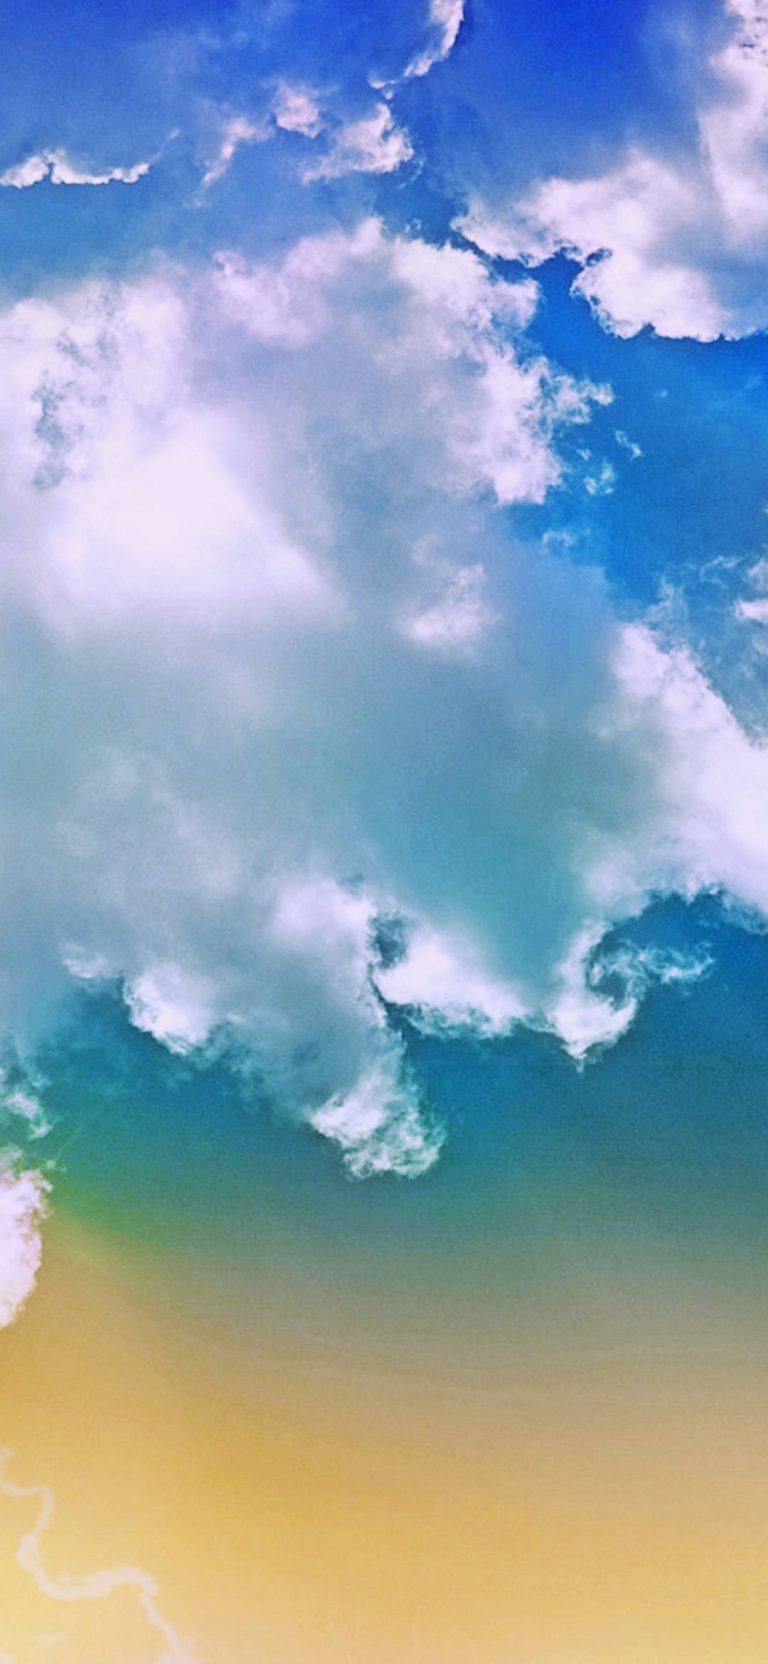 ultra hd wallpapers for android,sky,cloud,daytime,blue,cumulus